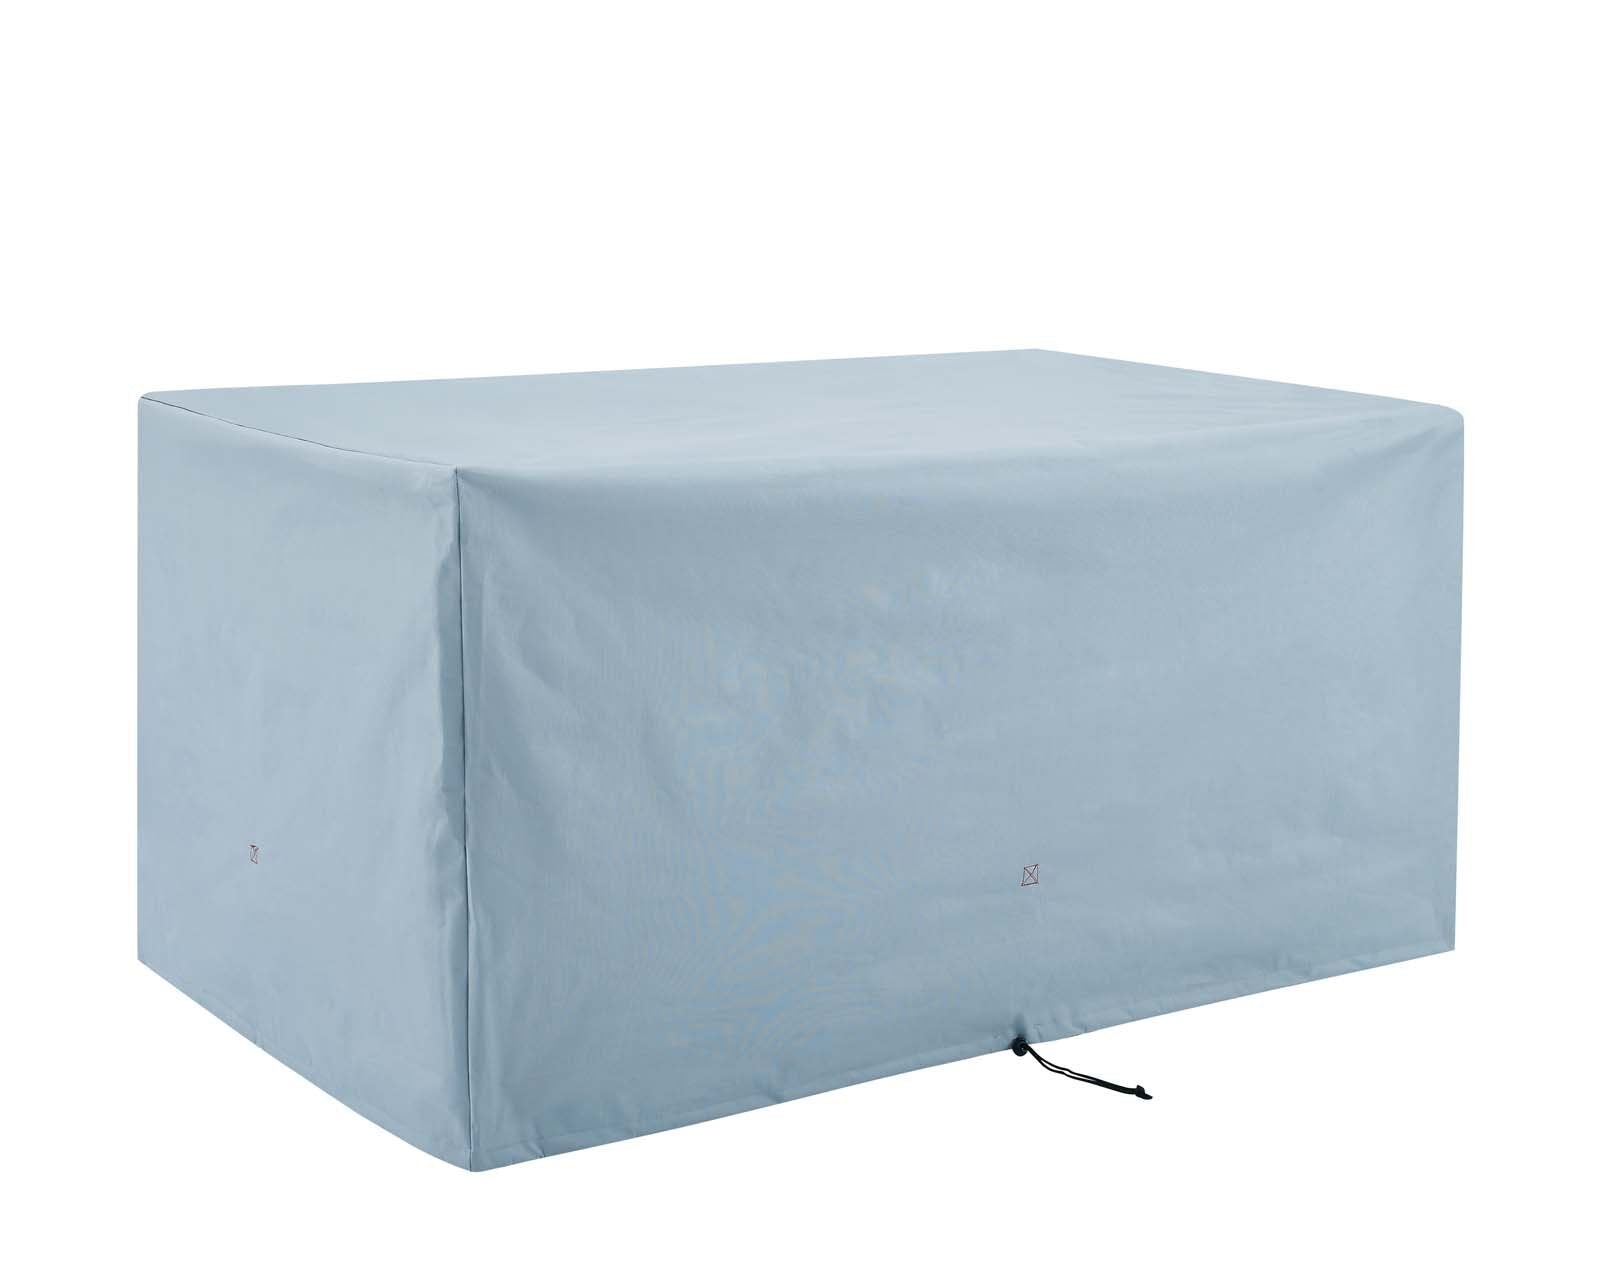 Conway Outdoor Patio Furniture Cover - East Shore Modern Home Furnishings